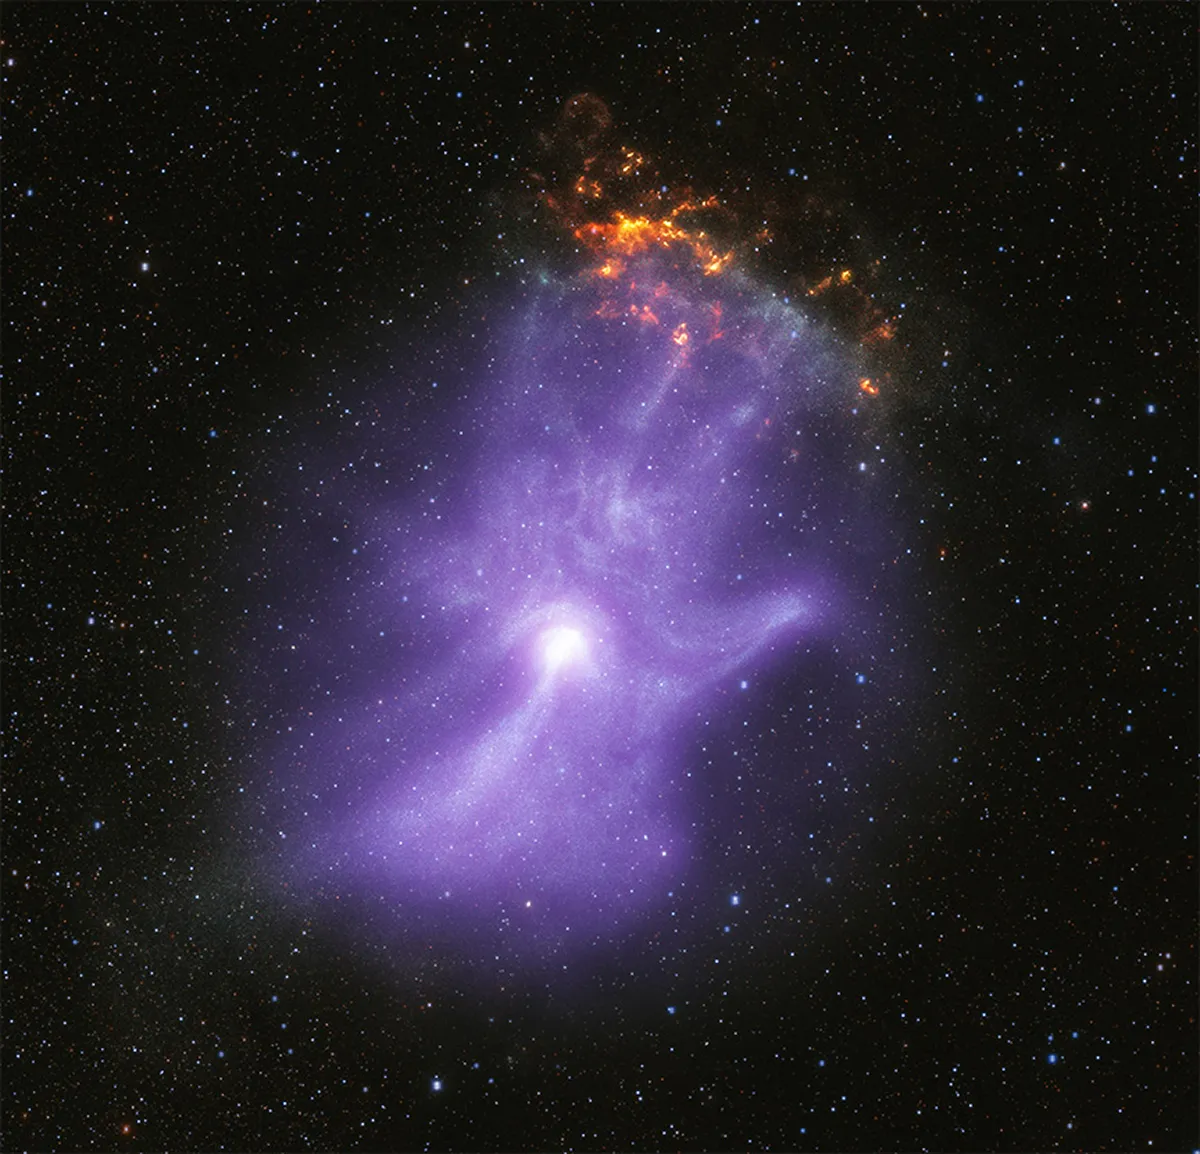 A view of pulsar wind nebula MSH 15-52, famous for looking like a ghostly cosmic hand. Credit: X-ray: NASA/CXC/Stanford Univ./R. Romani et al. (Chandra); NASA/MSFC (IXPE); Infrared: NASA/JPL-Caltech/DECaPS; Image Processing: NASA/CXC/SAO/J. Schmidt